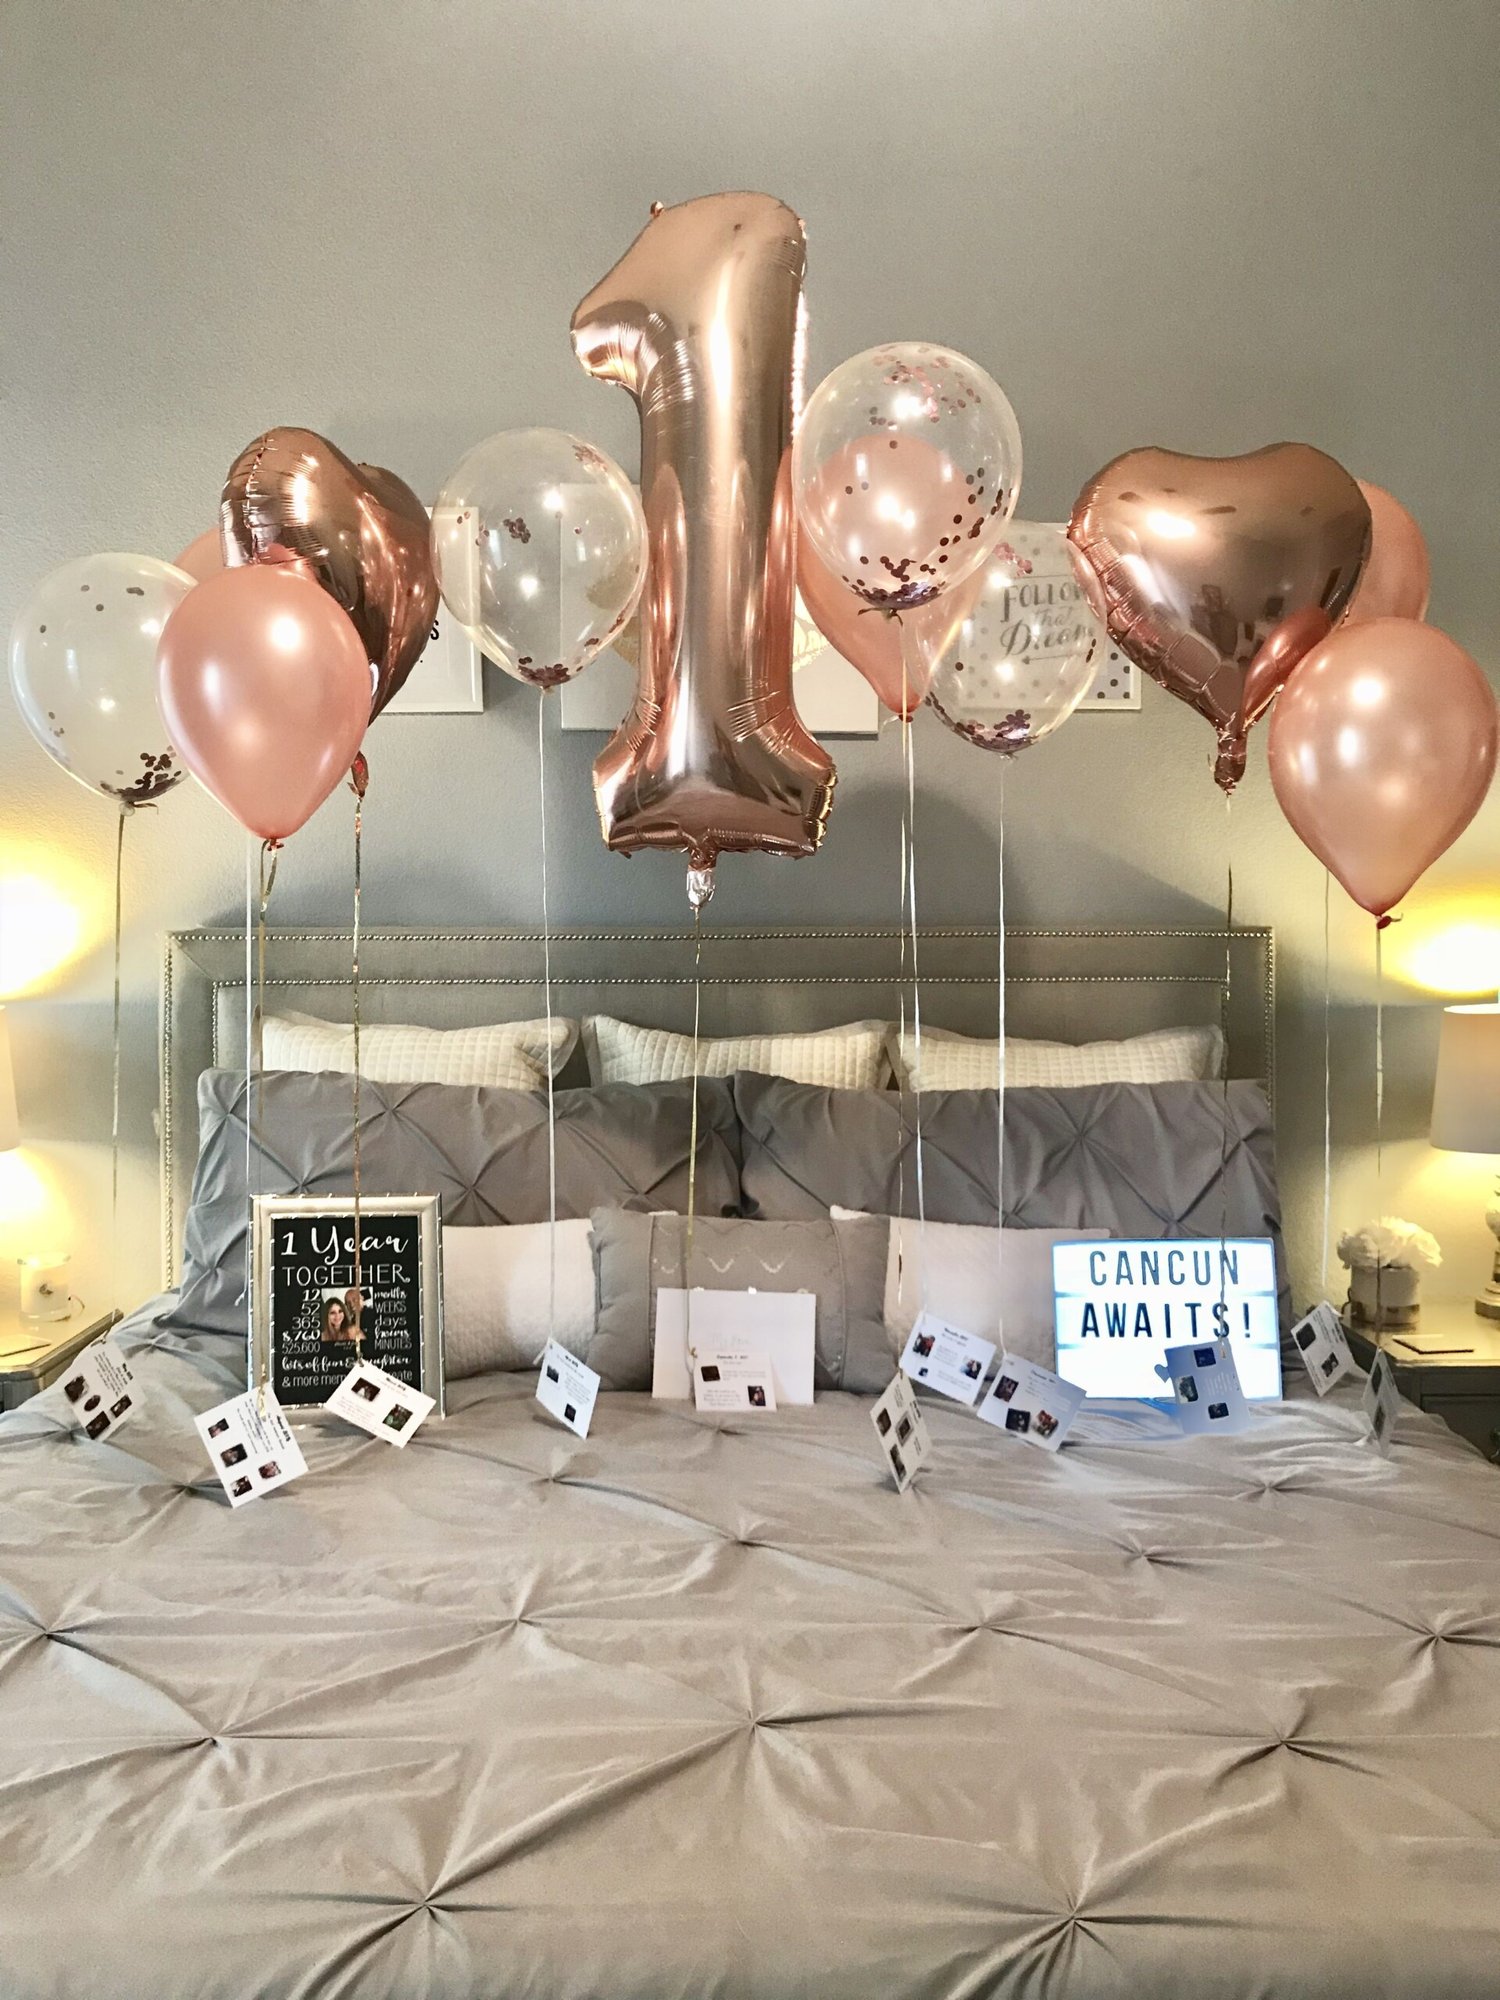 The First Anniversary of a Couple's Love365Balloon Anniversary Surprise  Romantic Balloon Room Decoration Scene Layout | Lazada PH